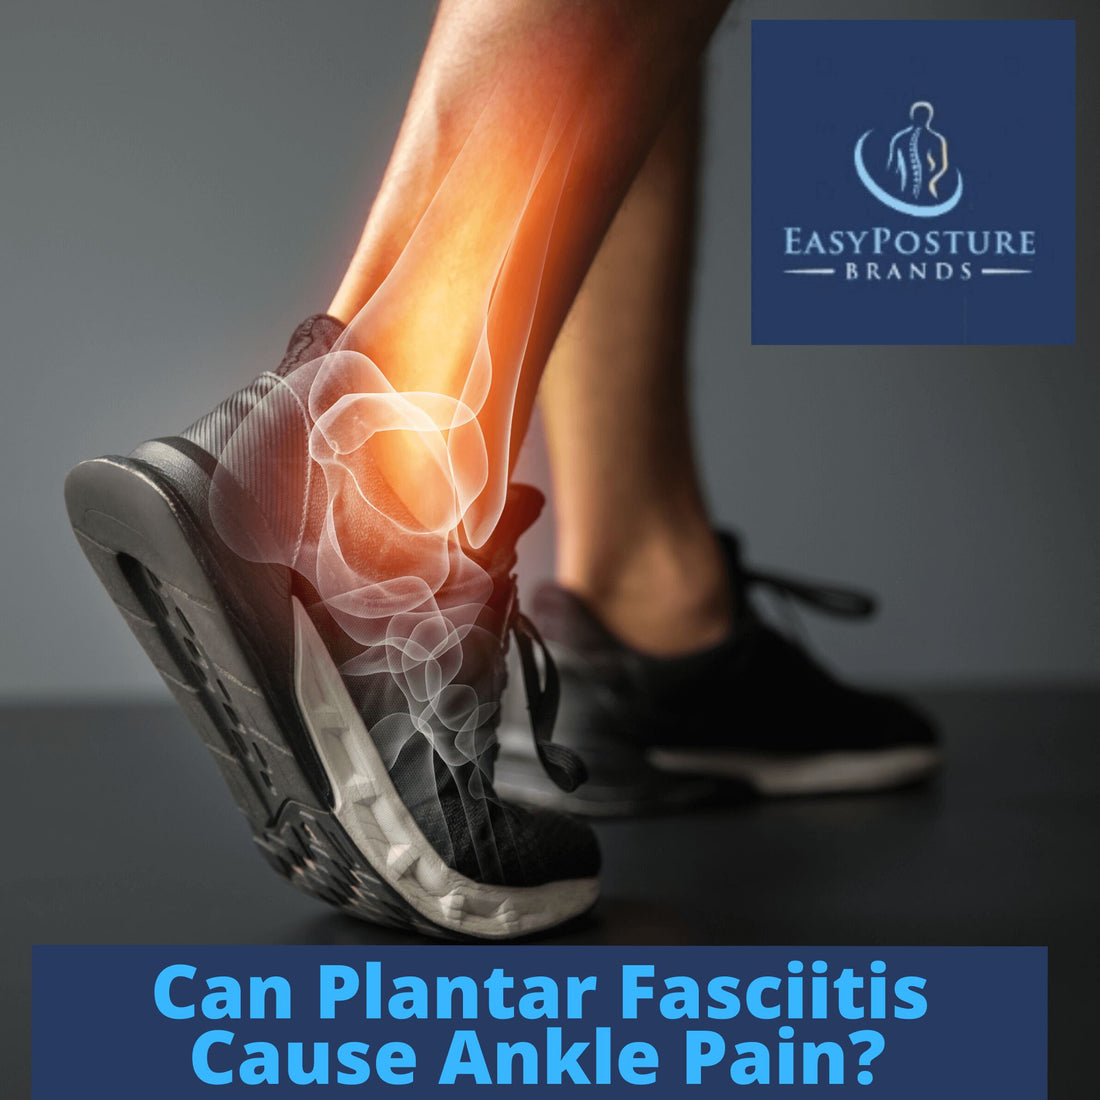 Can Plantar Fasciitis Cause Ankle Pain? - Easy Posture Brands